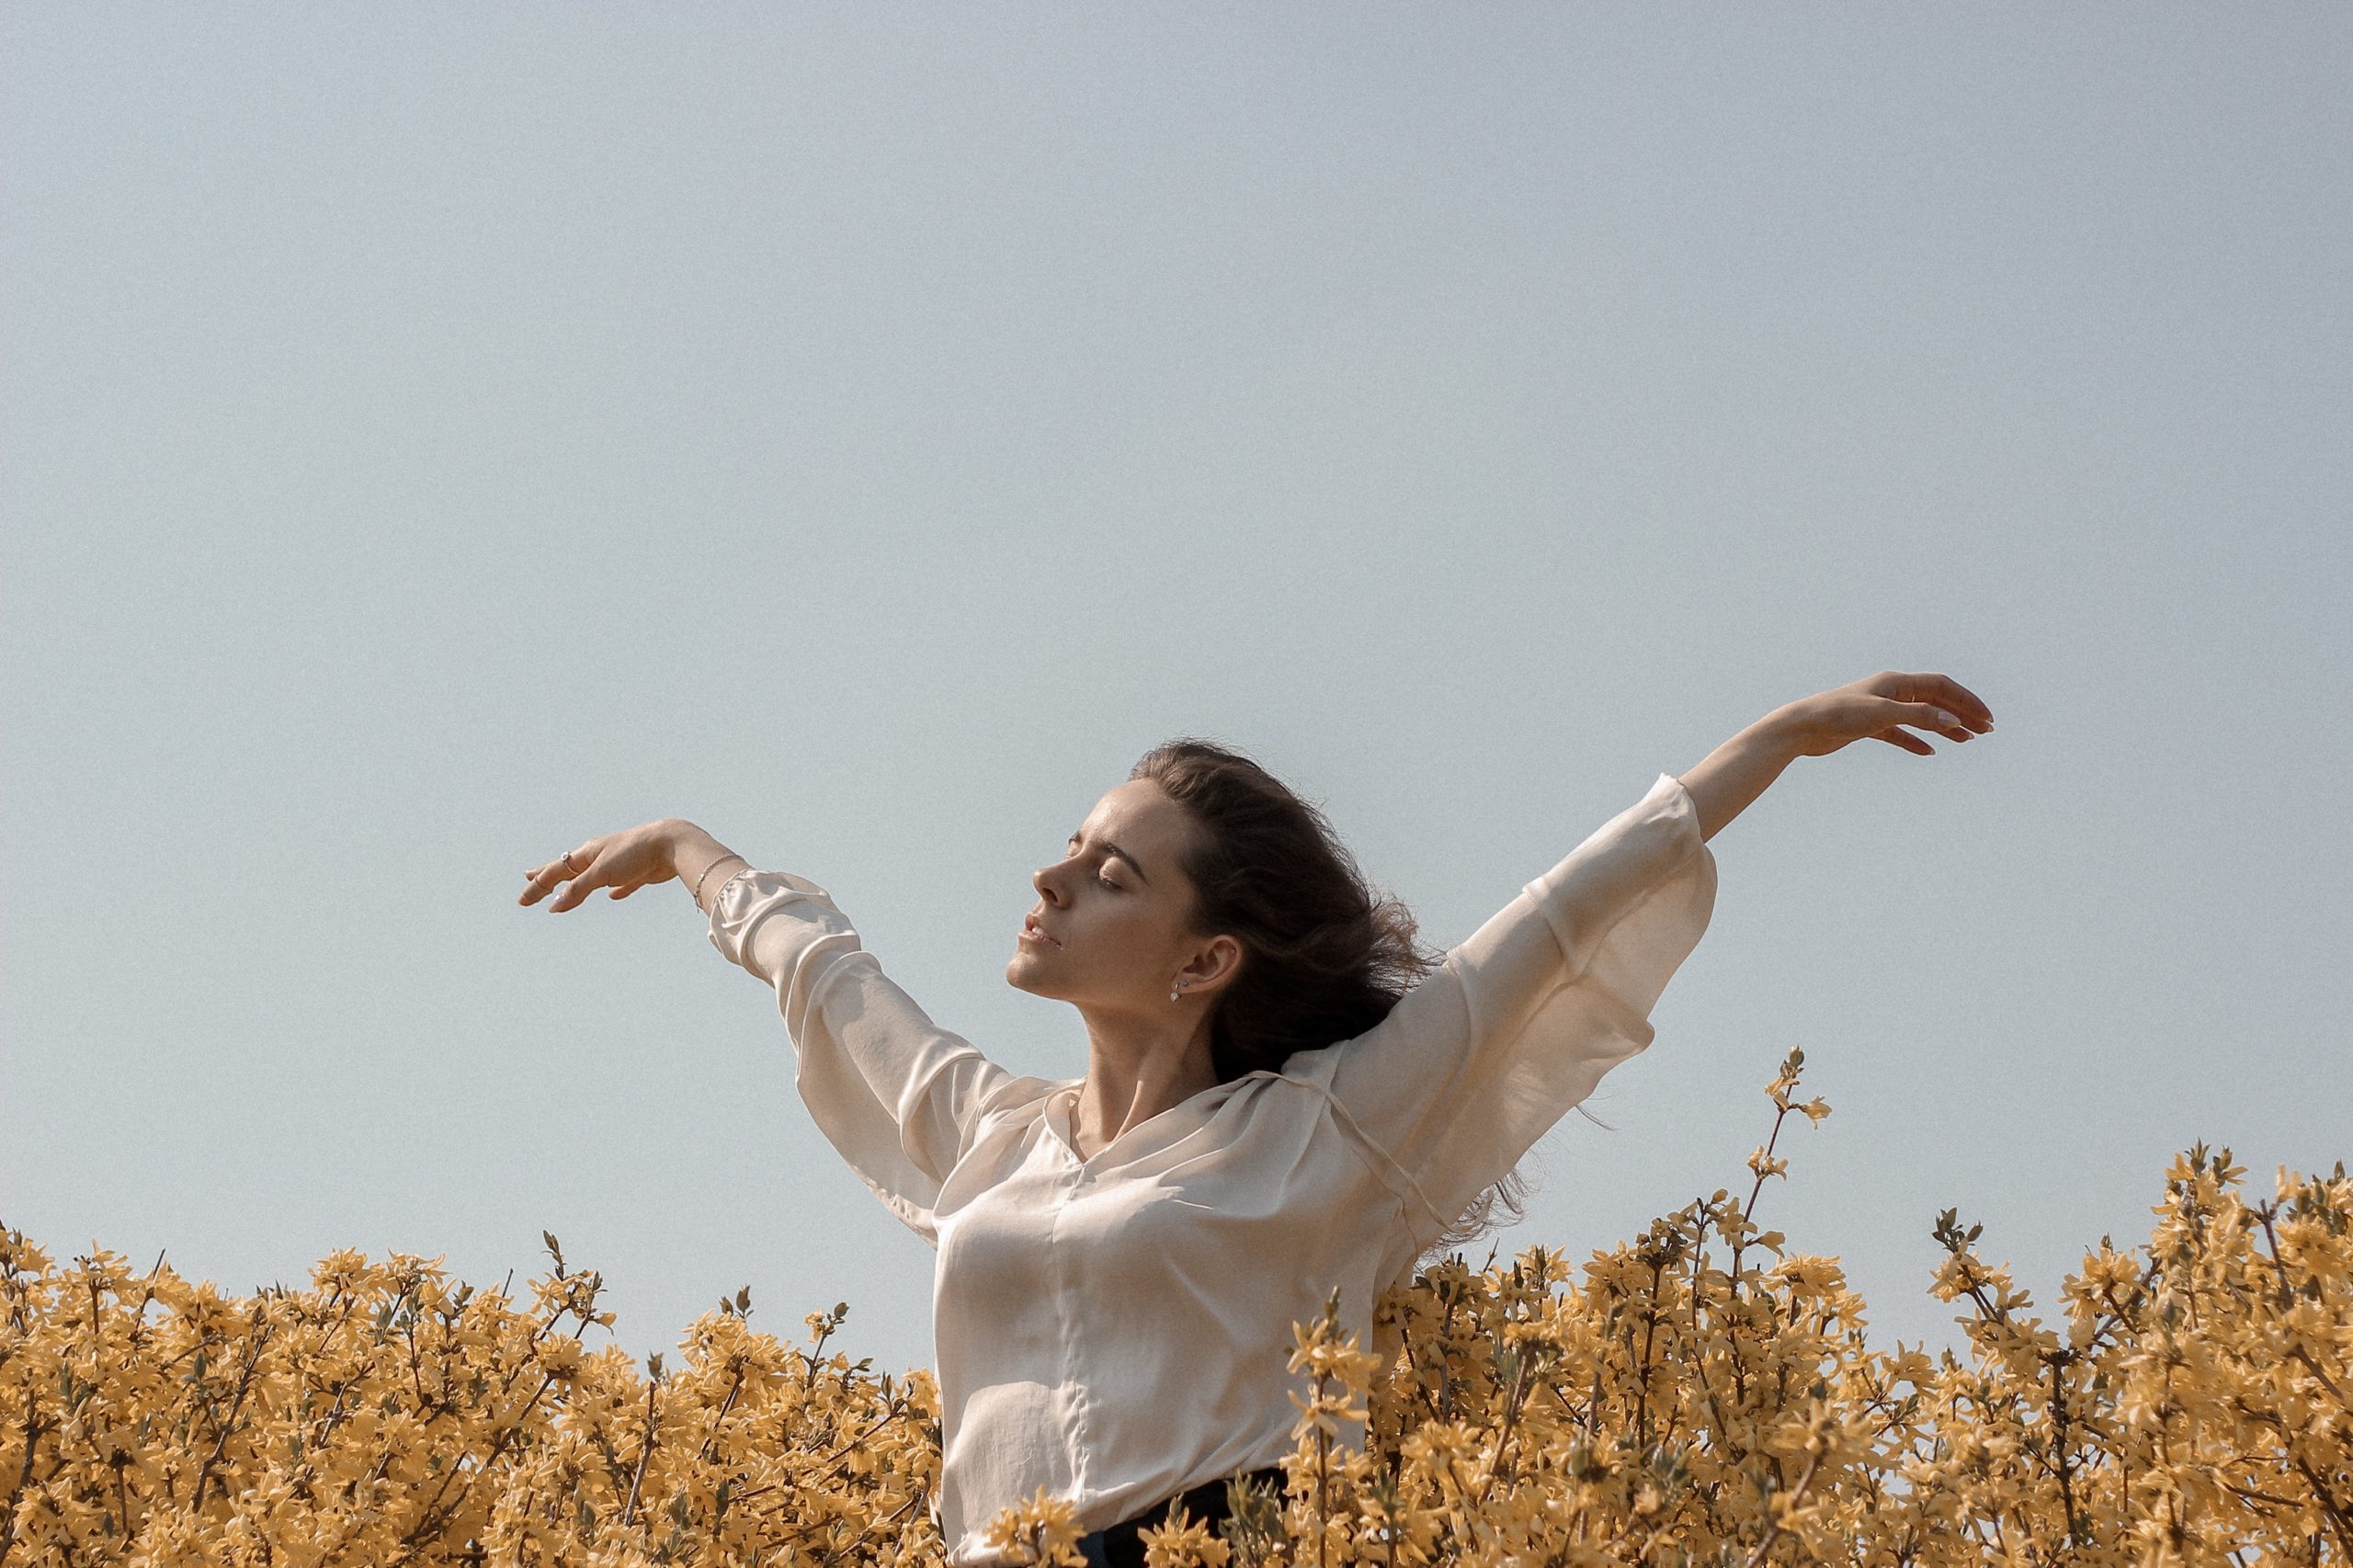 Woman reaching her arms out feeling at peace in the middle of a field showing her self-esteem